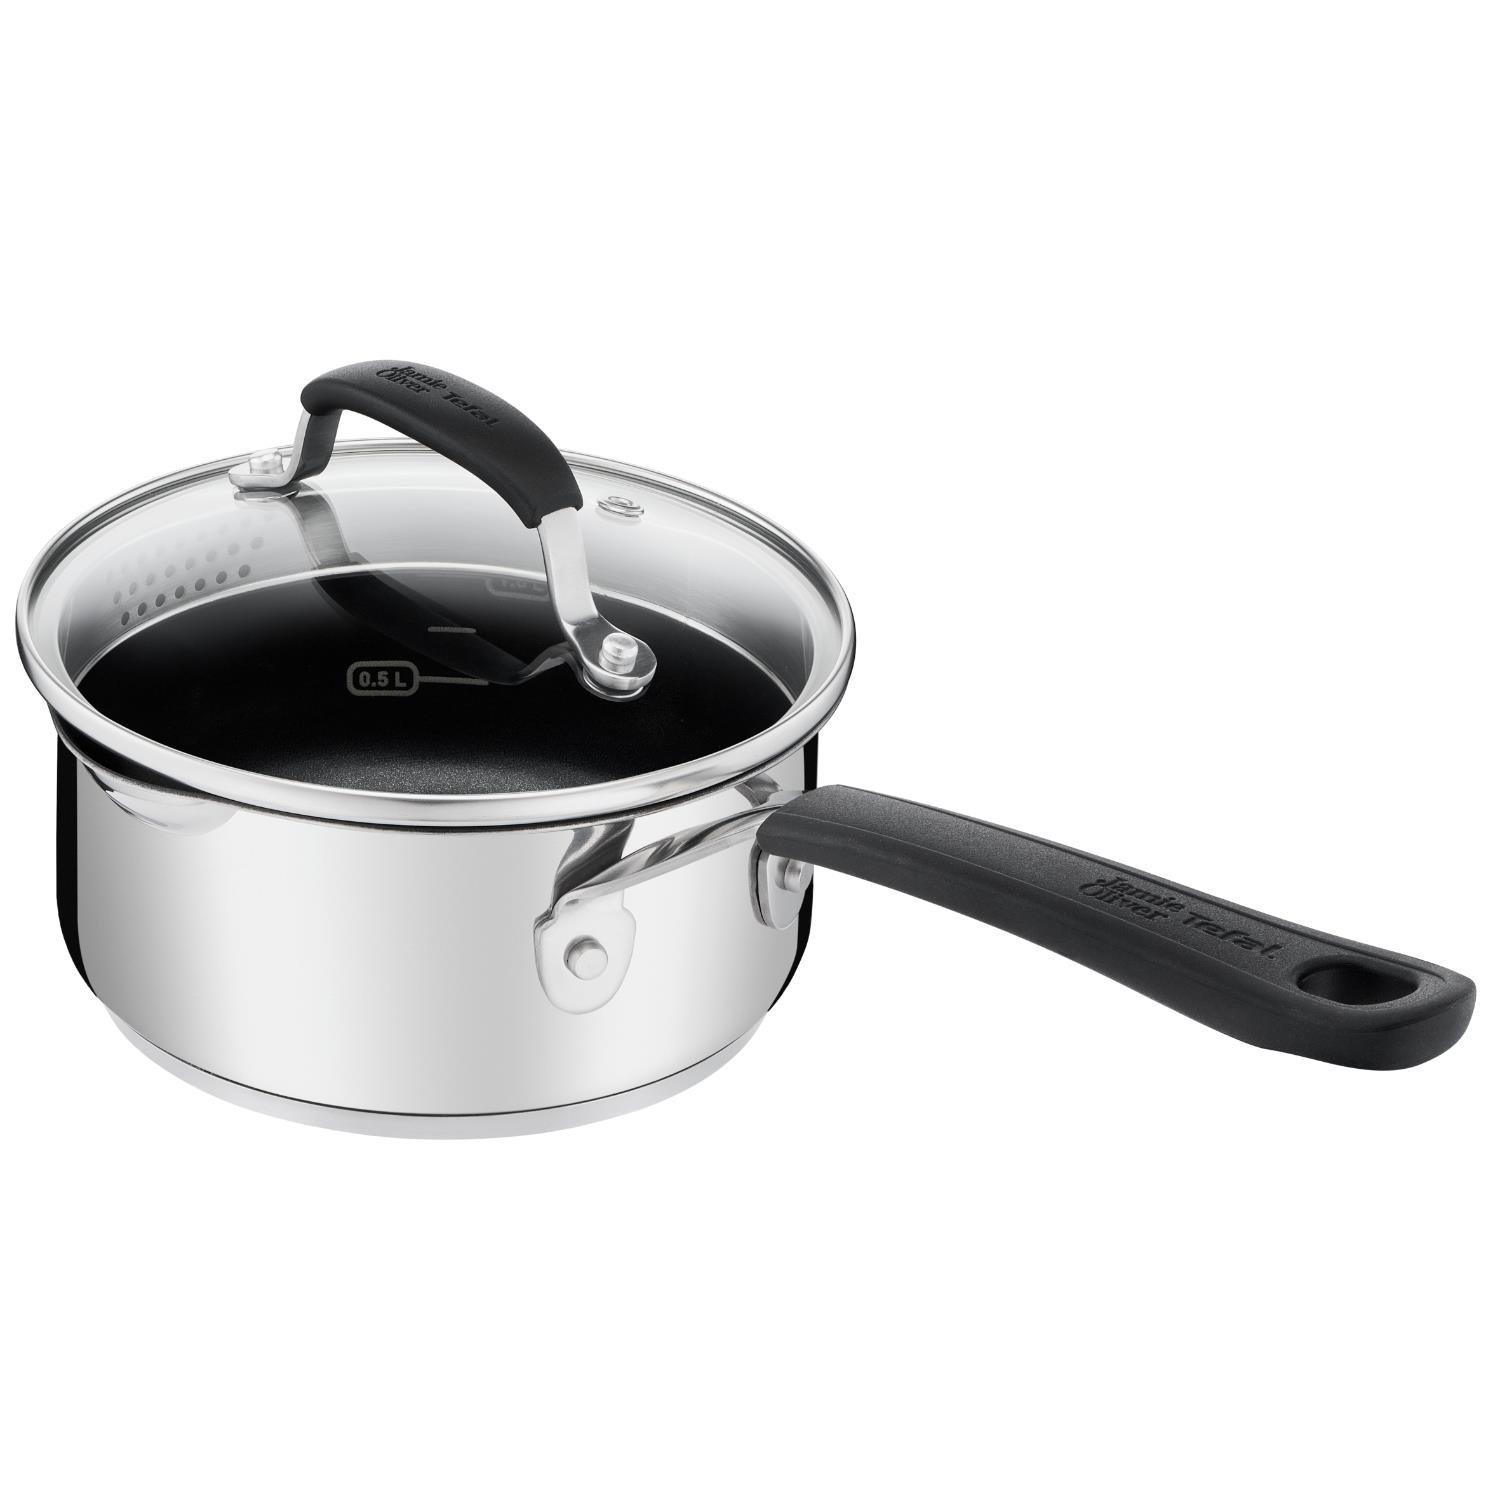 Jamie Oliver Quick and Easy Stainless Steel 20cm Saucepan